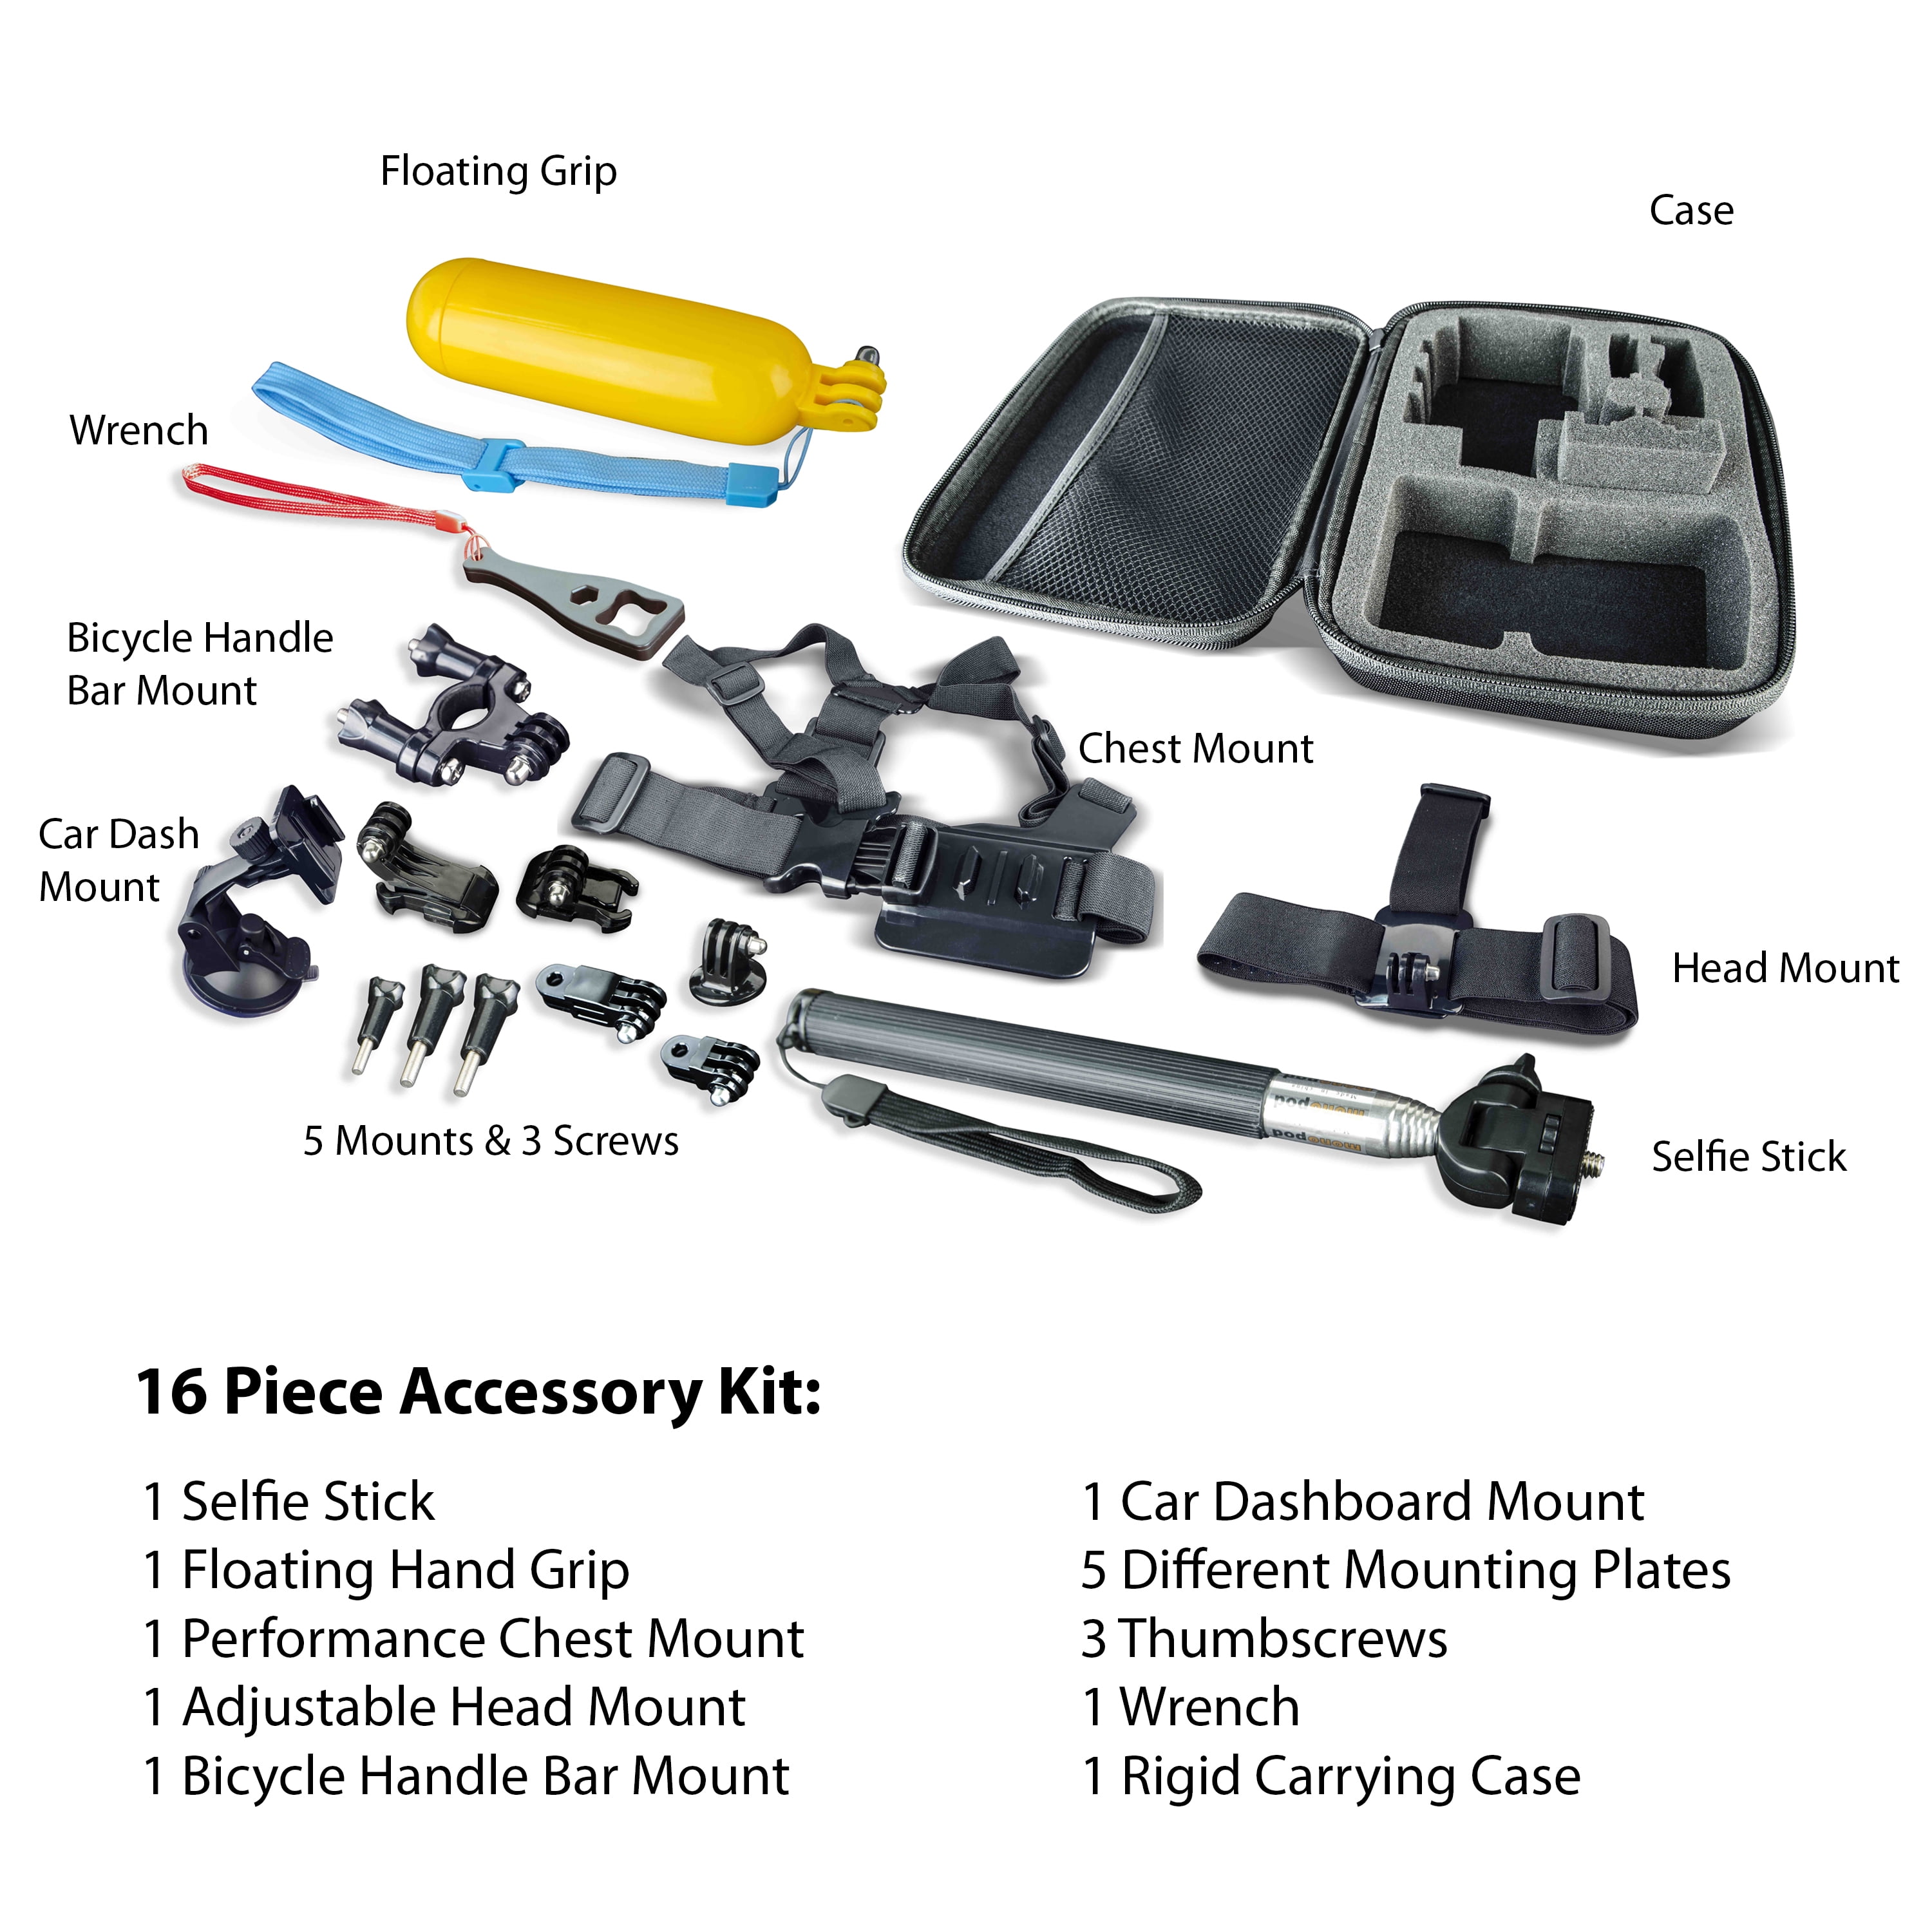 OPTEX ACTION CAMERA ACCESSORIES KIT - 13 PIECES